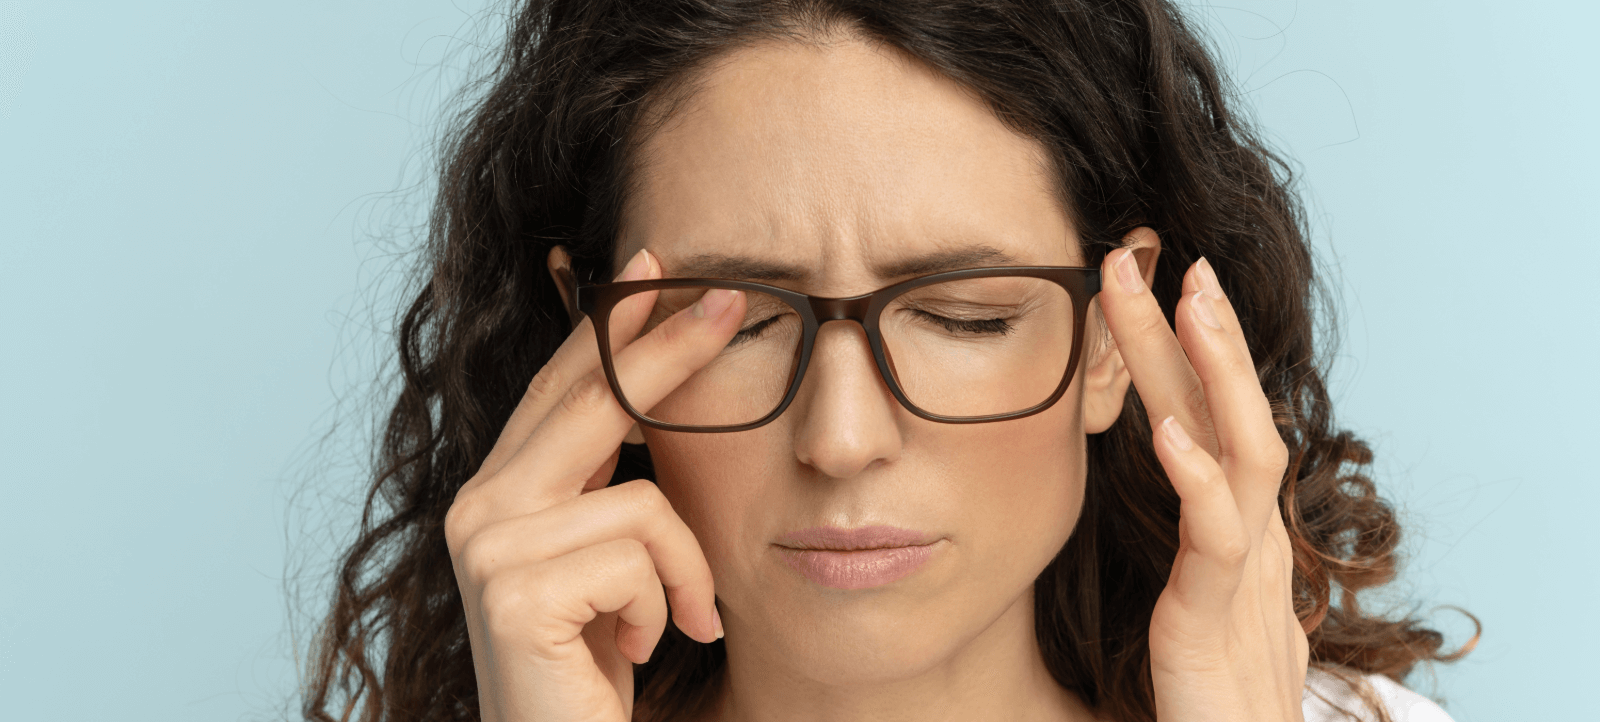 How Anxiety Can Cause Sore Eyes